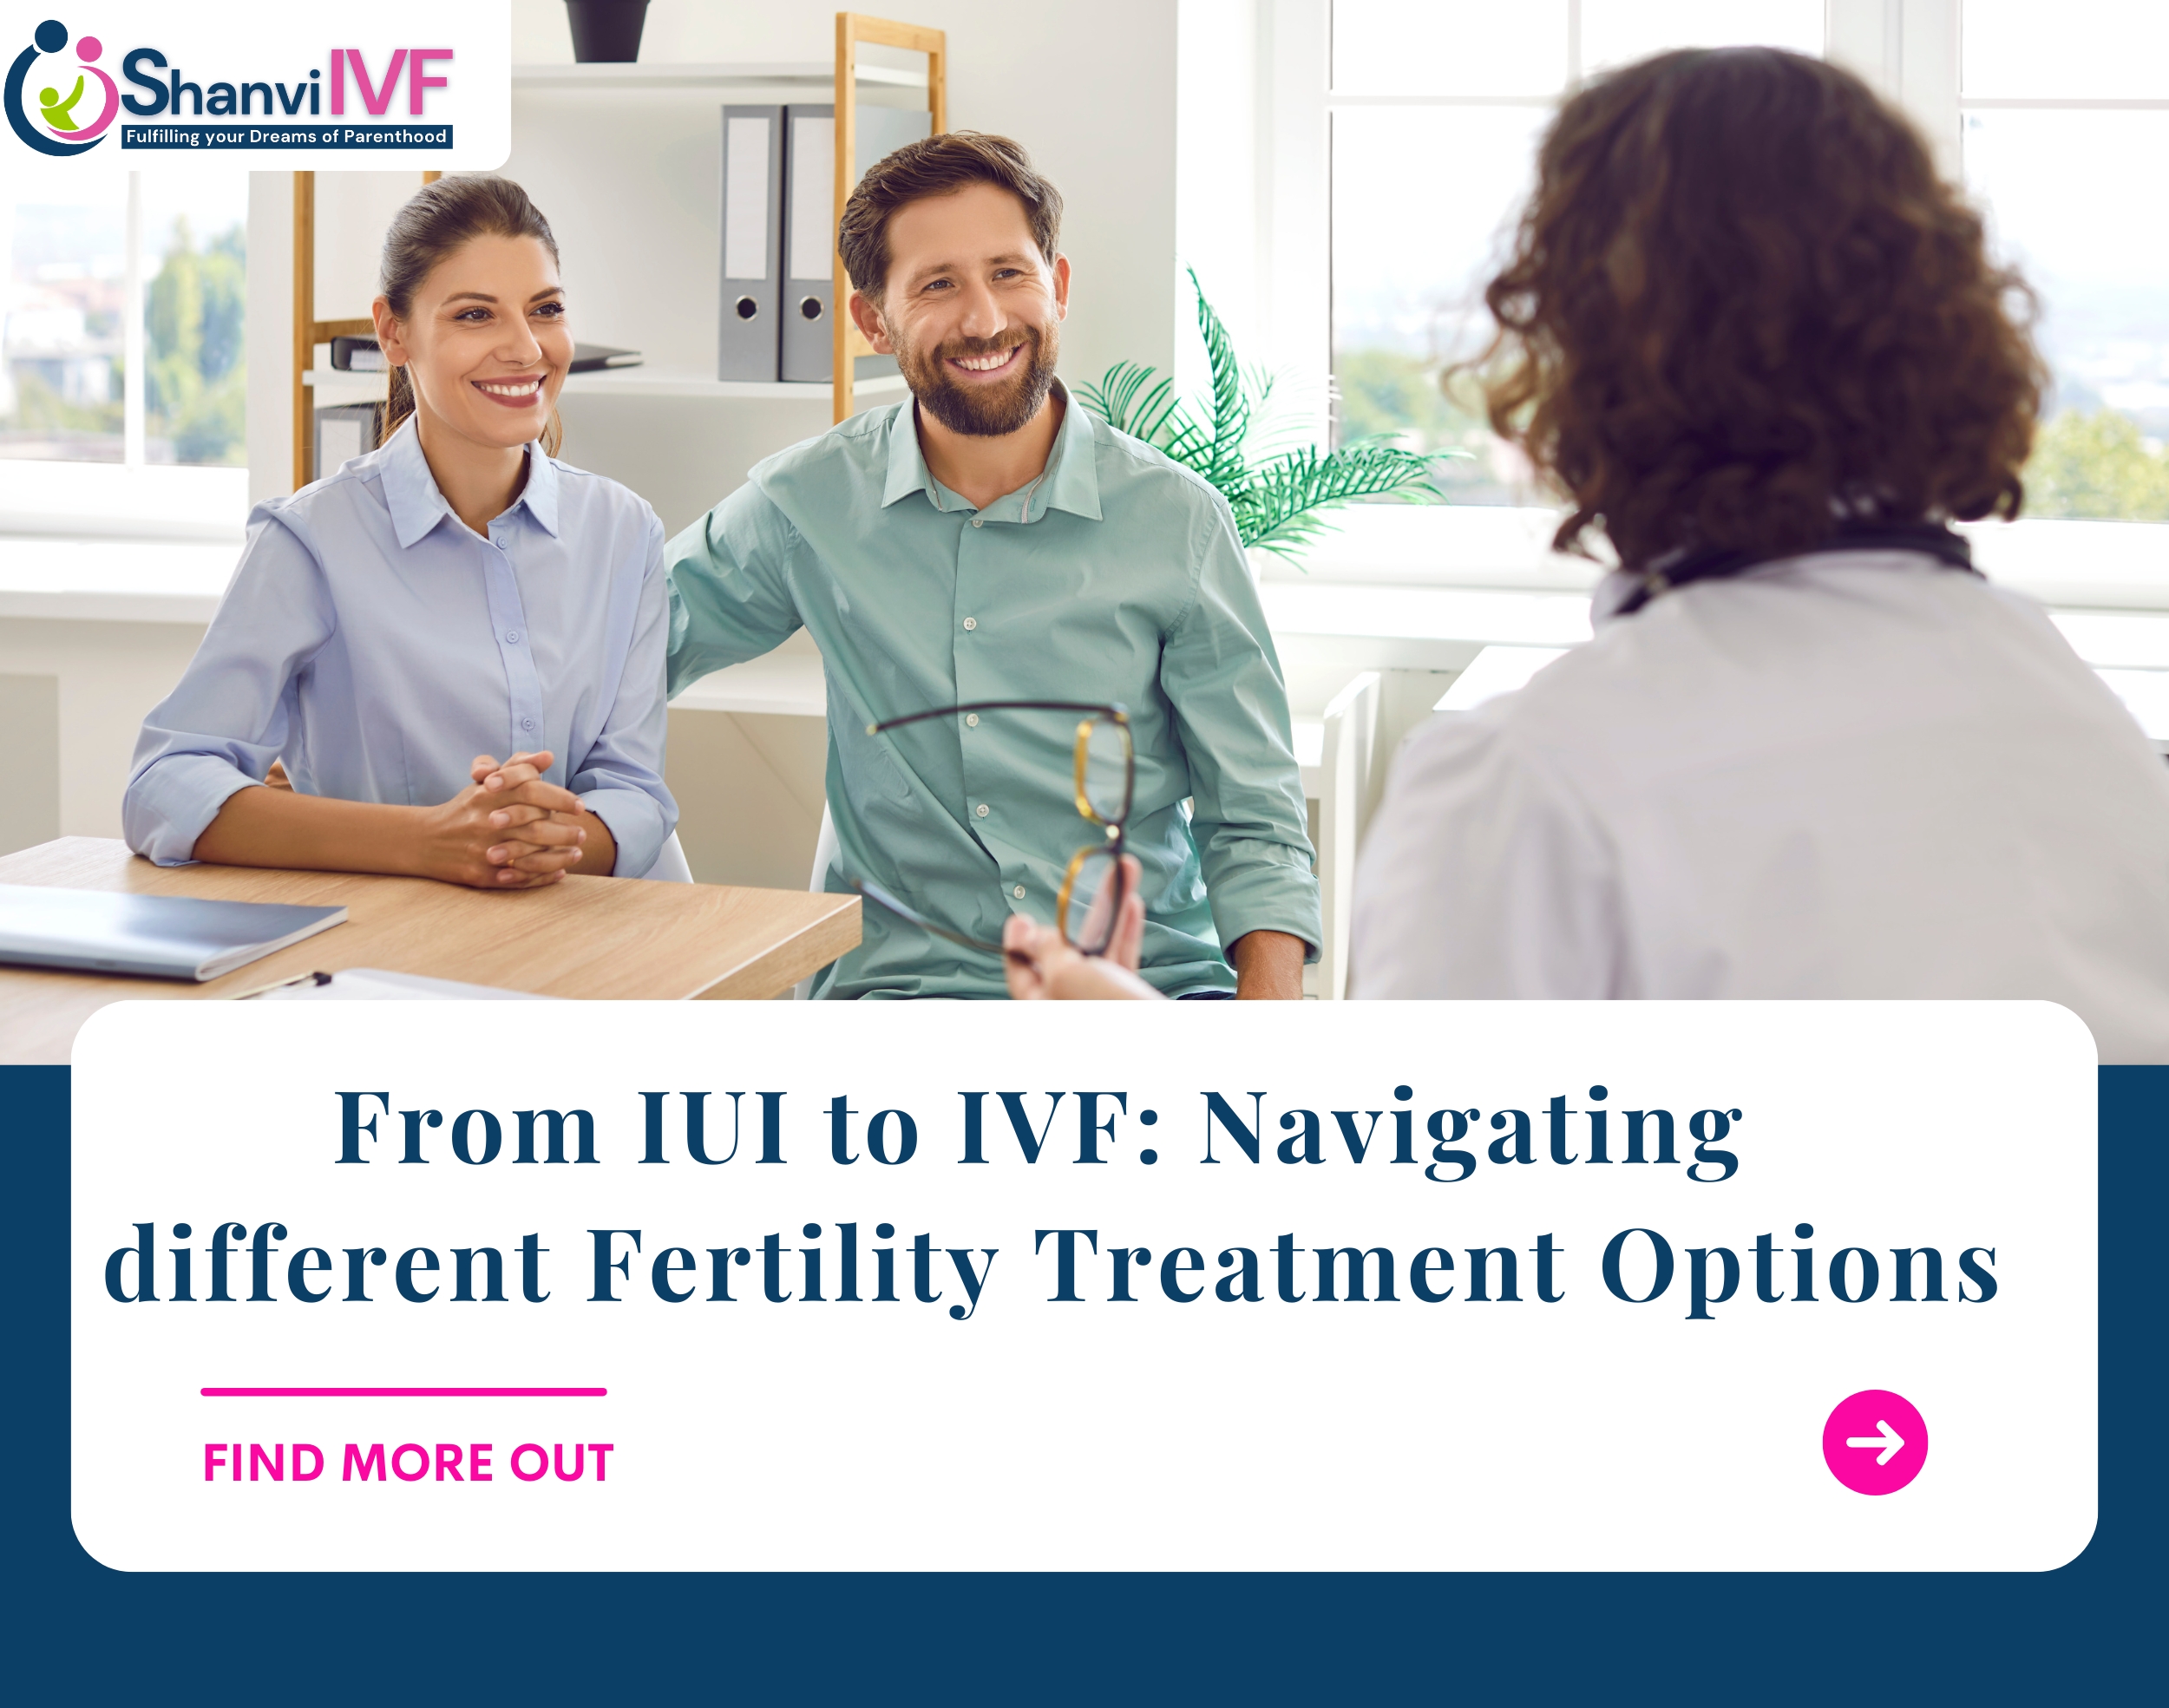 From IUI to IVF: Navigating Different Fertility Treatment Options